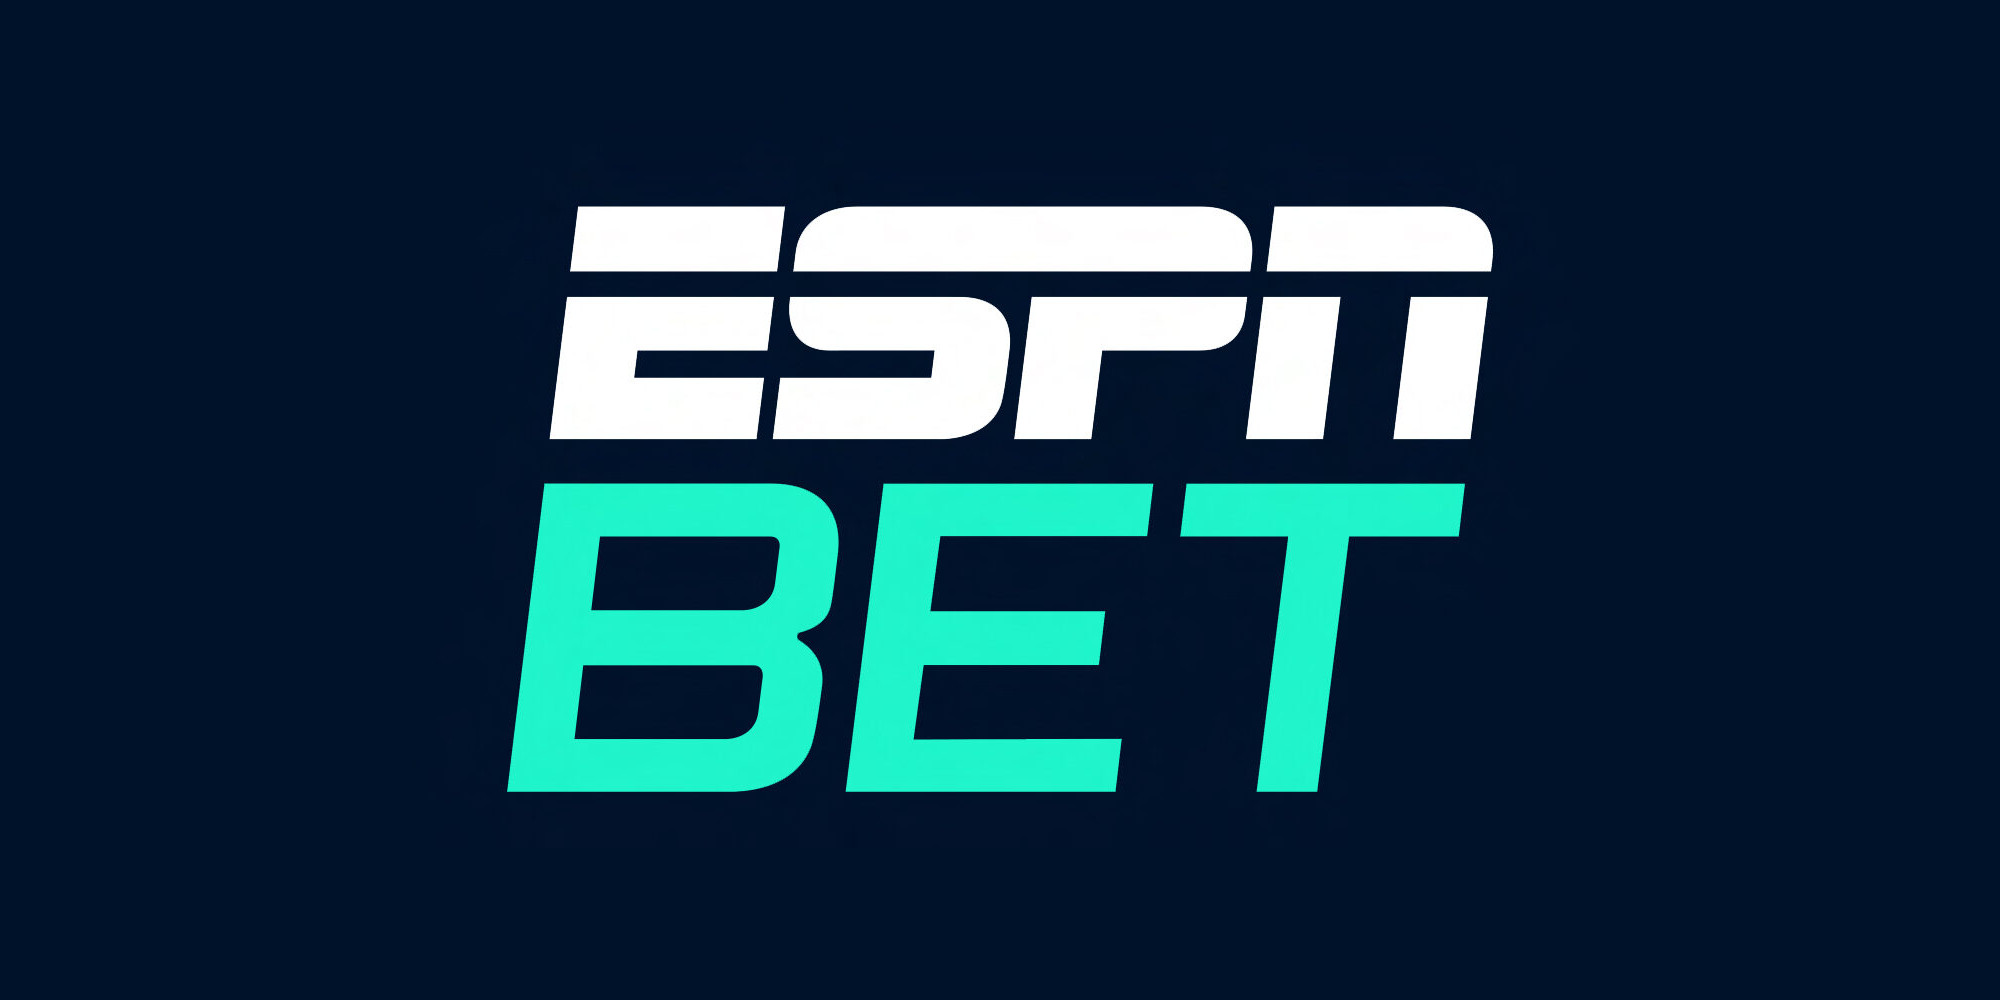 ESPN BET Launches in New Jersey and Looks to Challenge Market Leaders